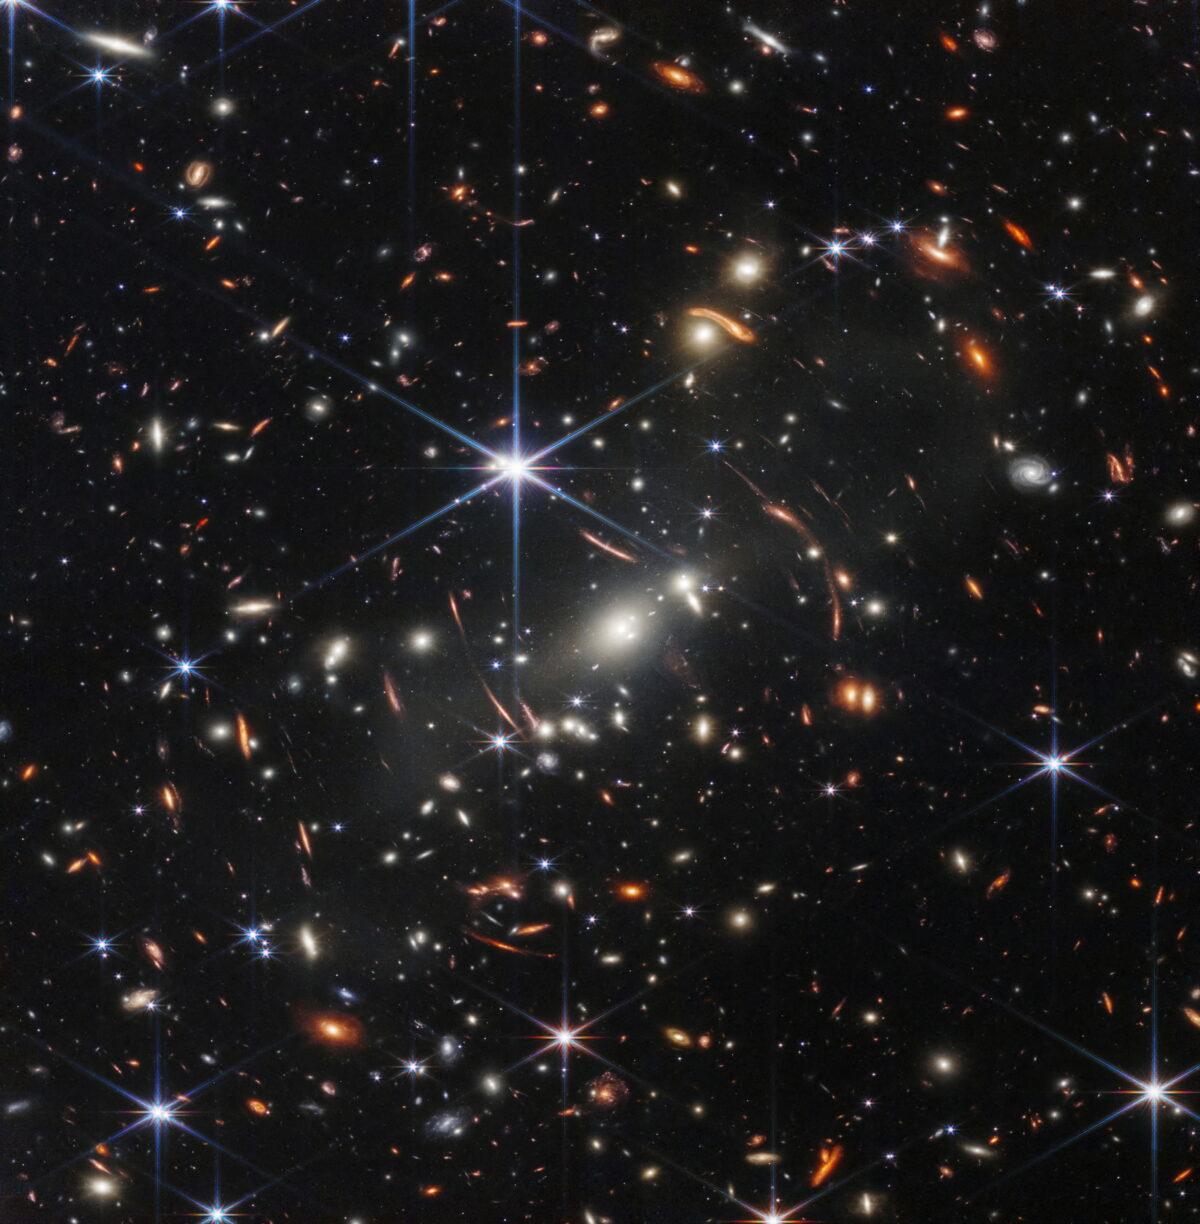 The first full-color image from NASA's James Webb Space Telescope, a revolutionary apparatus designed to peer through the cosmos to the dawn of the universe, shows the galaxy cluster SMACS 0723, known as Webb’s First Deep Field, in a composite made from images at different wavelengths taken with a Near-Infrared Camera and released July 11, 2022. (NASA, ESA, CSA, STScI, Webb ERO Production Team/Handout via Reuters)